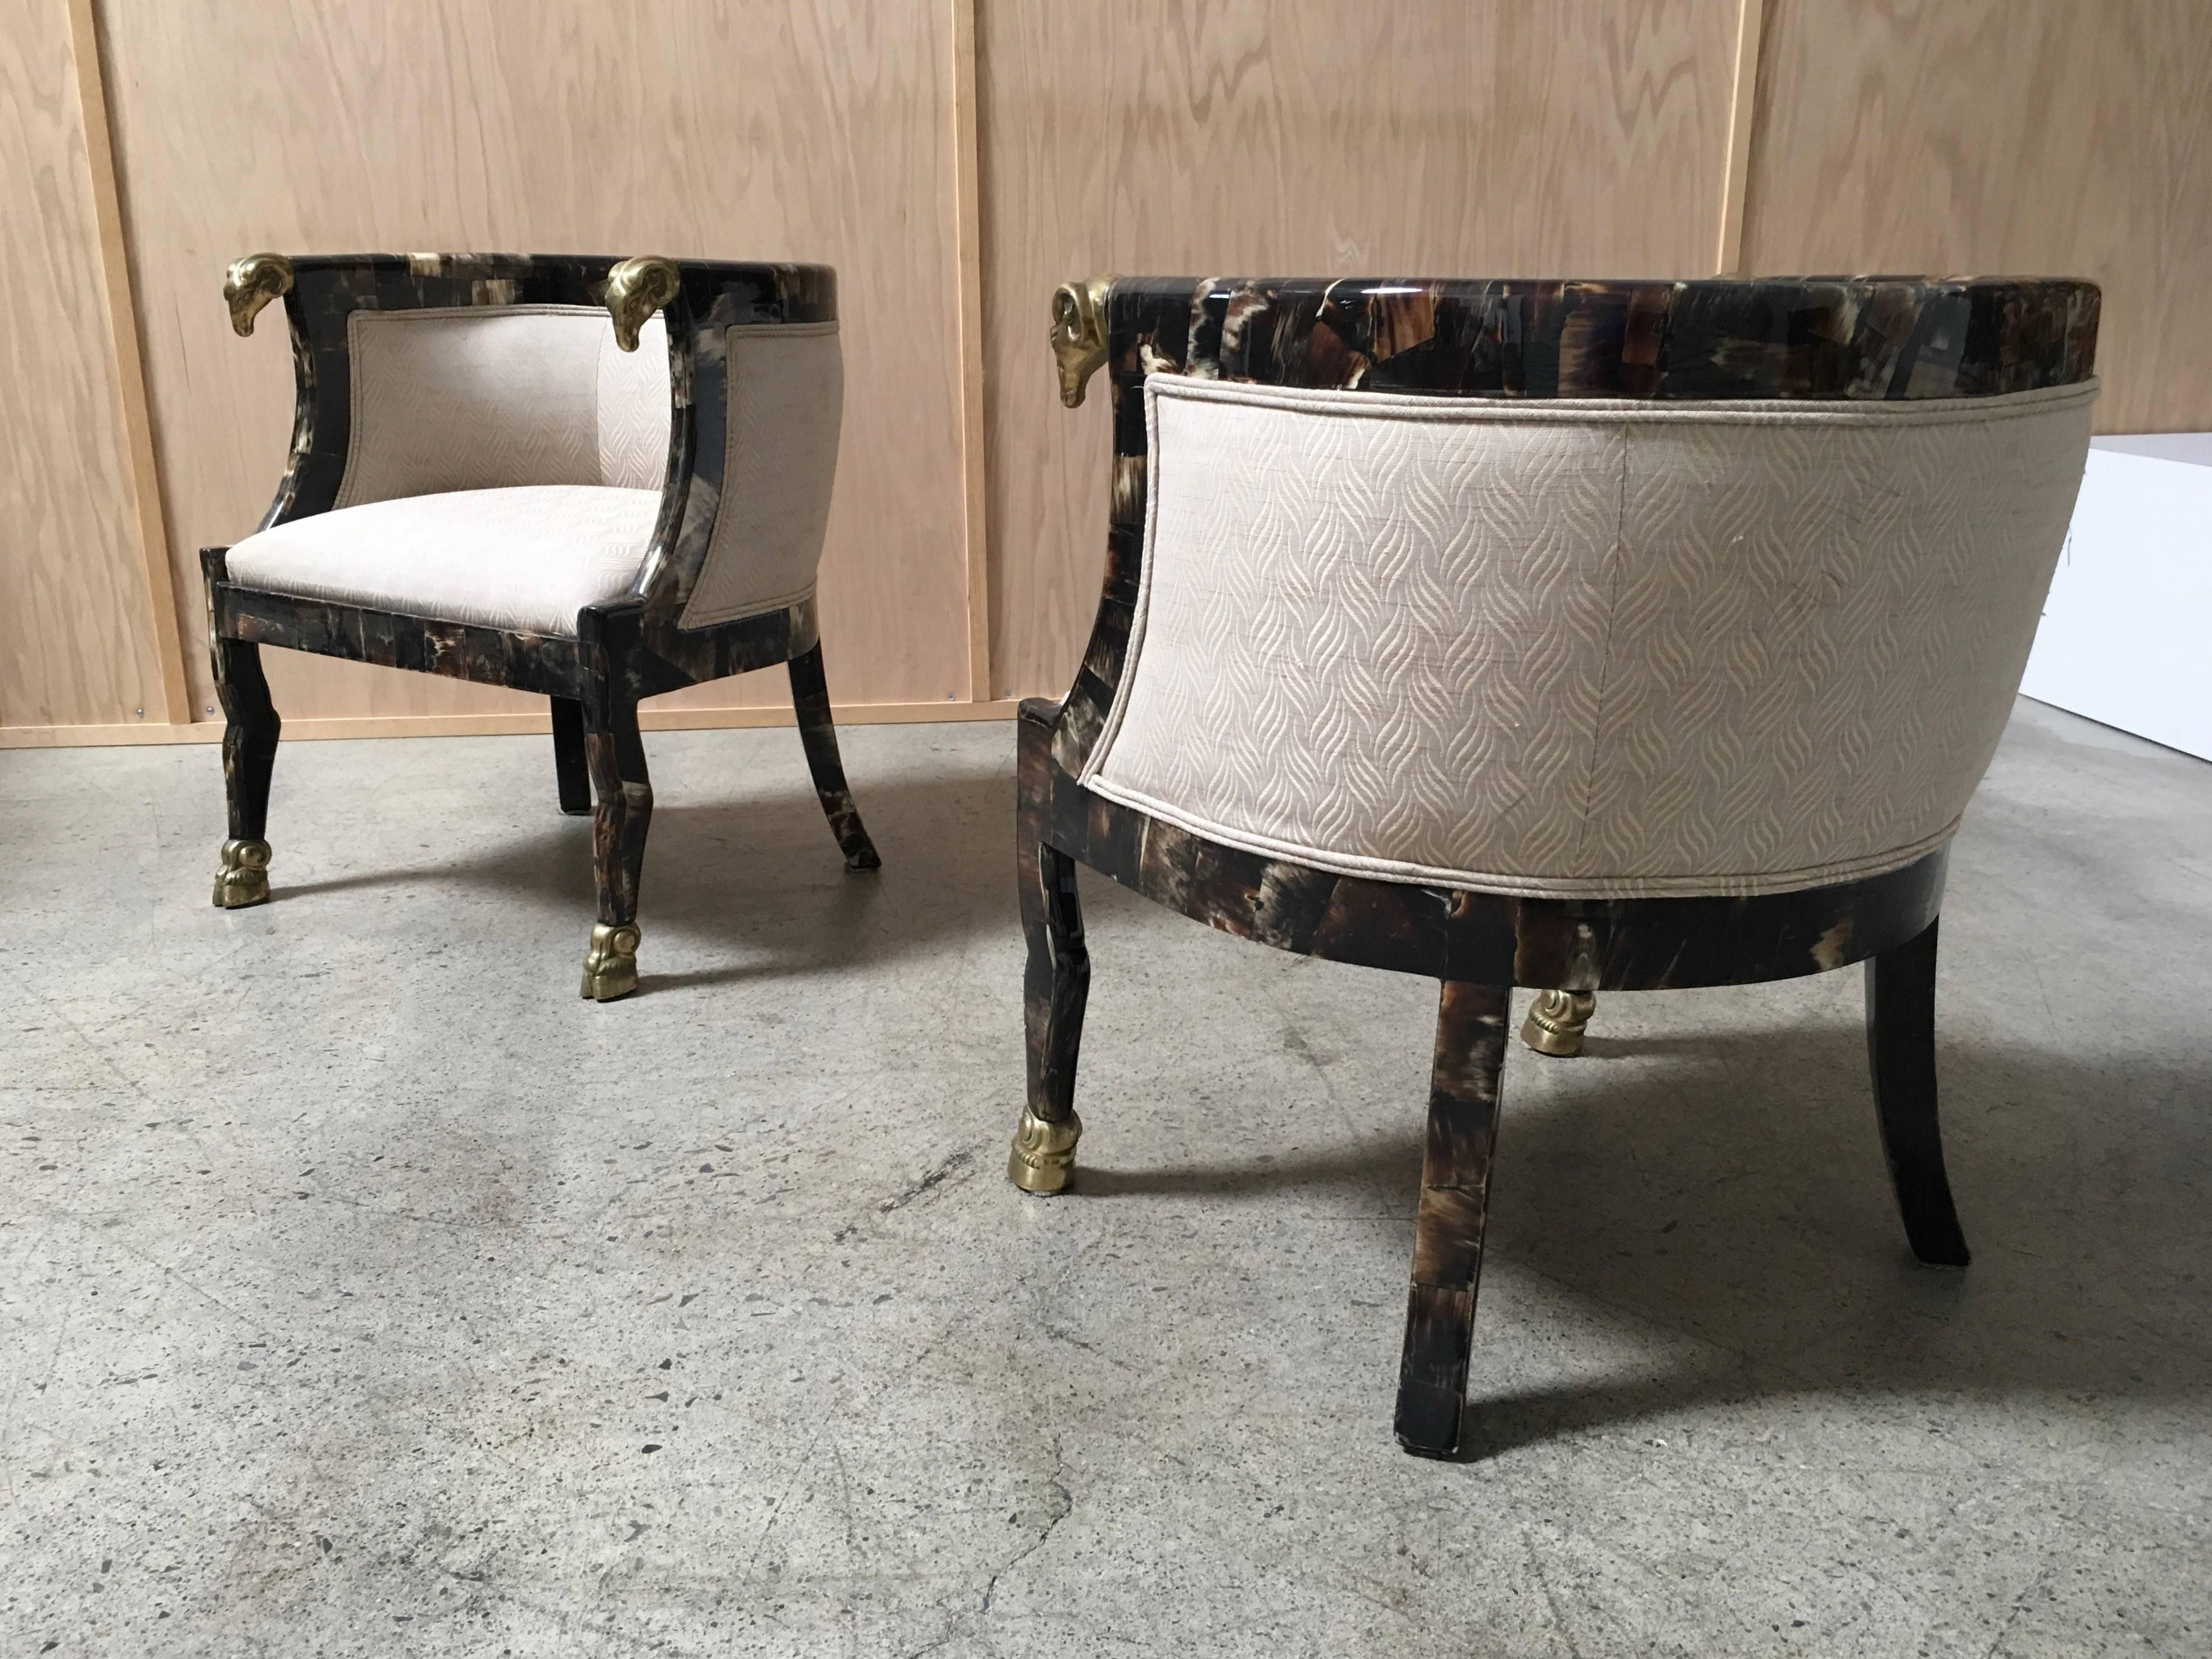 Pair of steer horn covered barrel chairs with brass ram heads and feet.